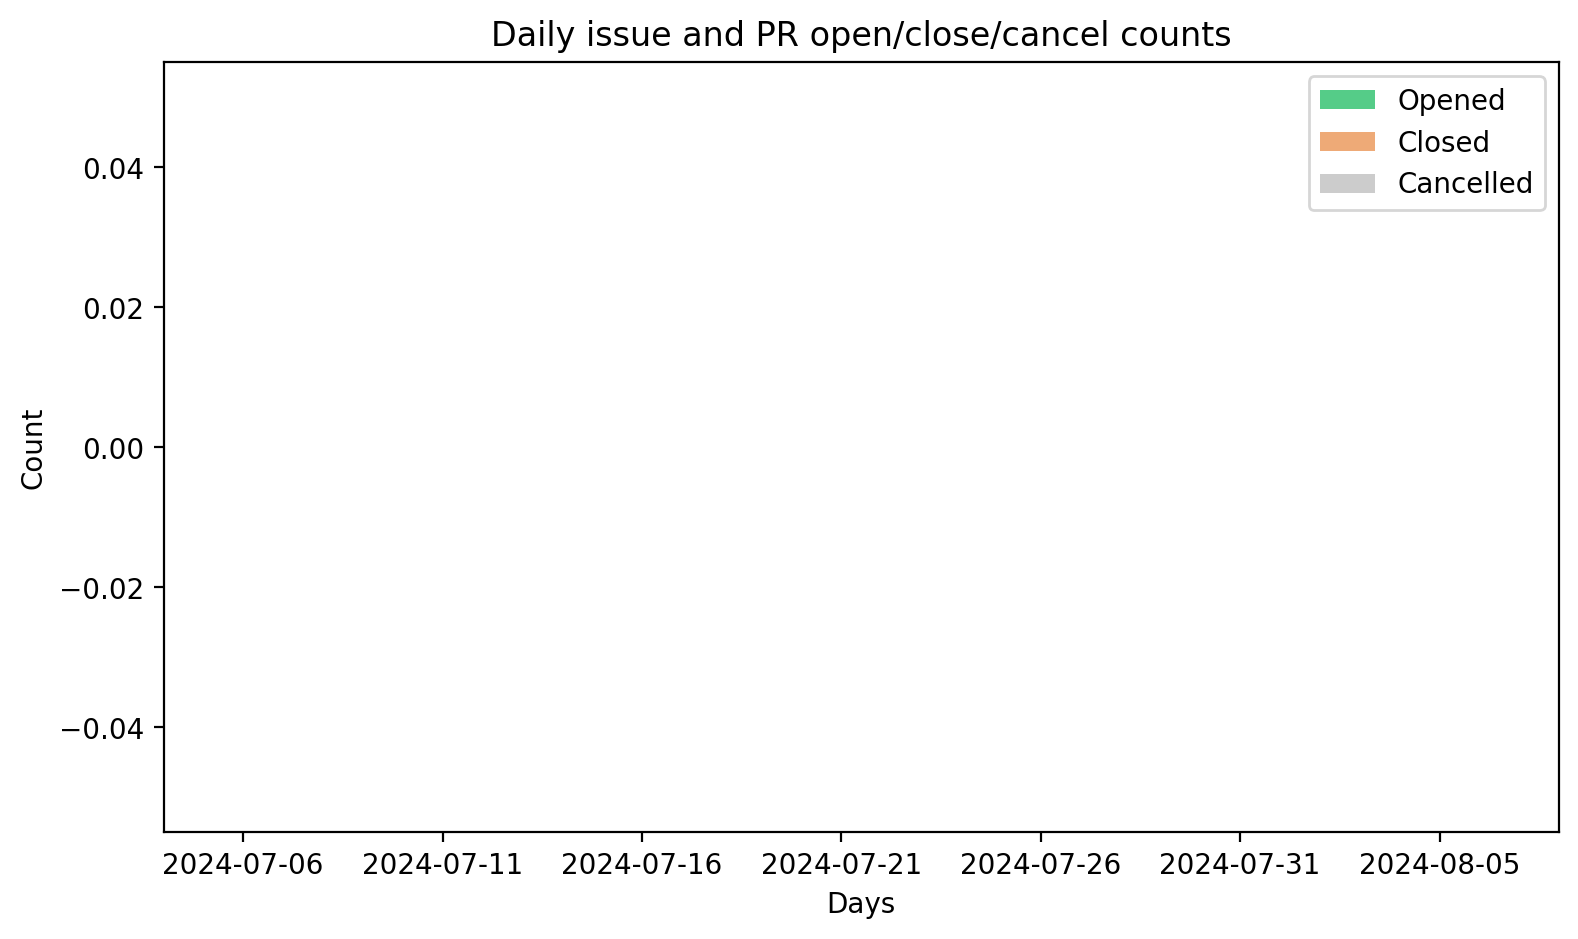 Daily issues/PRs opened/closed/cancelled